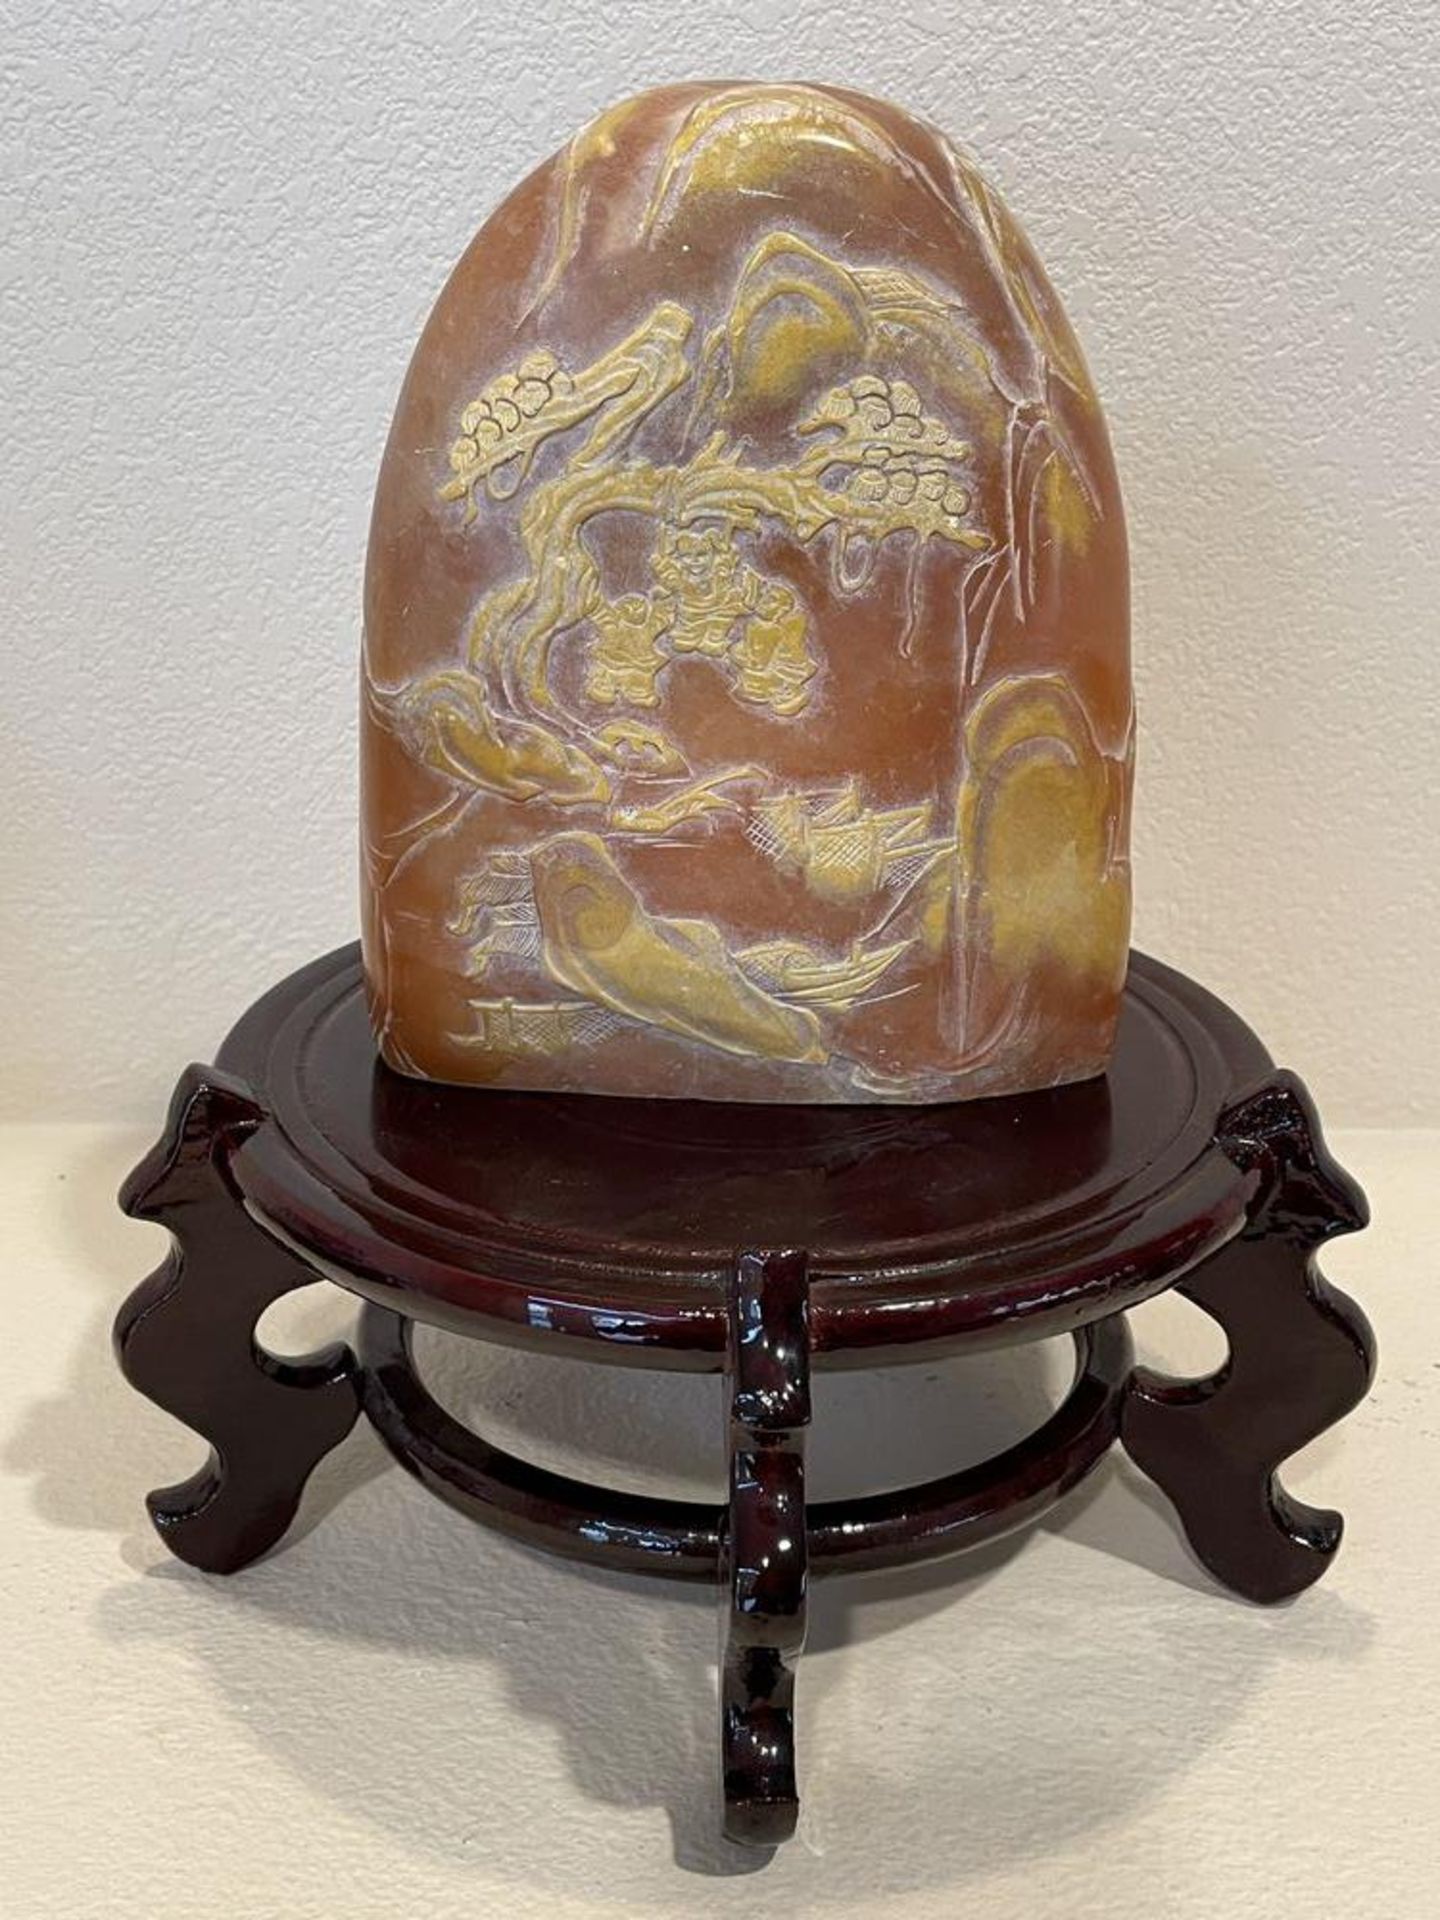 Orange/Amber Color East Asian Stone Sculpture on wood stand, Heavy/Cold Stone - Image 3 of 7